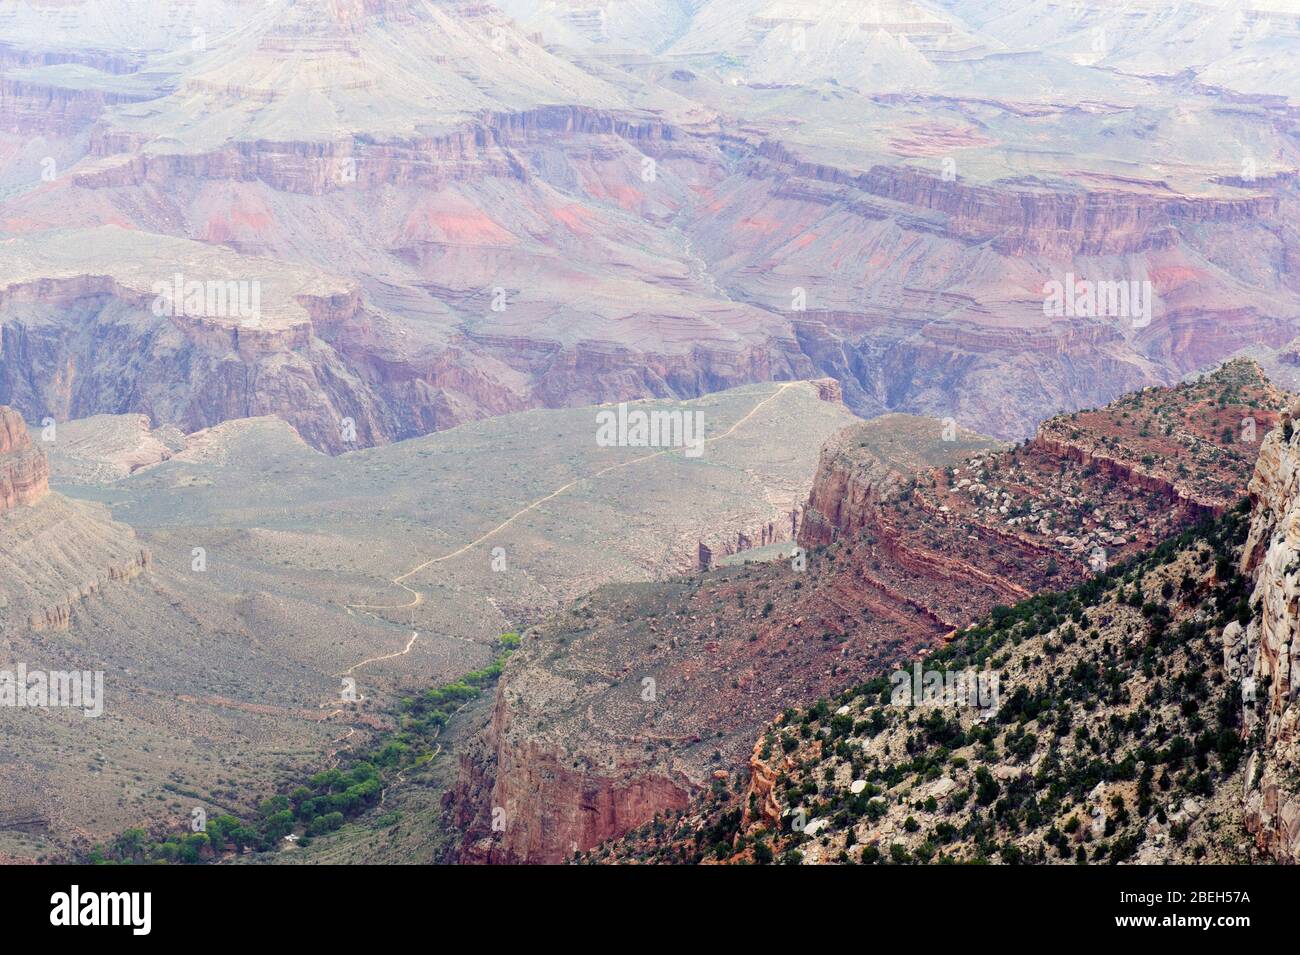 Looking down  into Grand Canyon from the South Rim. Bright Angel trail is visible in the distance. Stock Photo